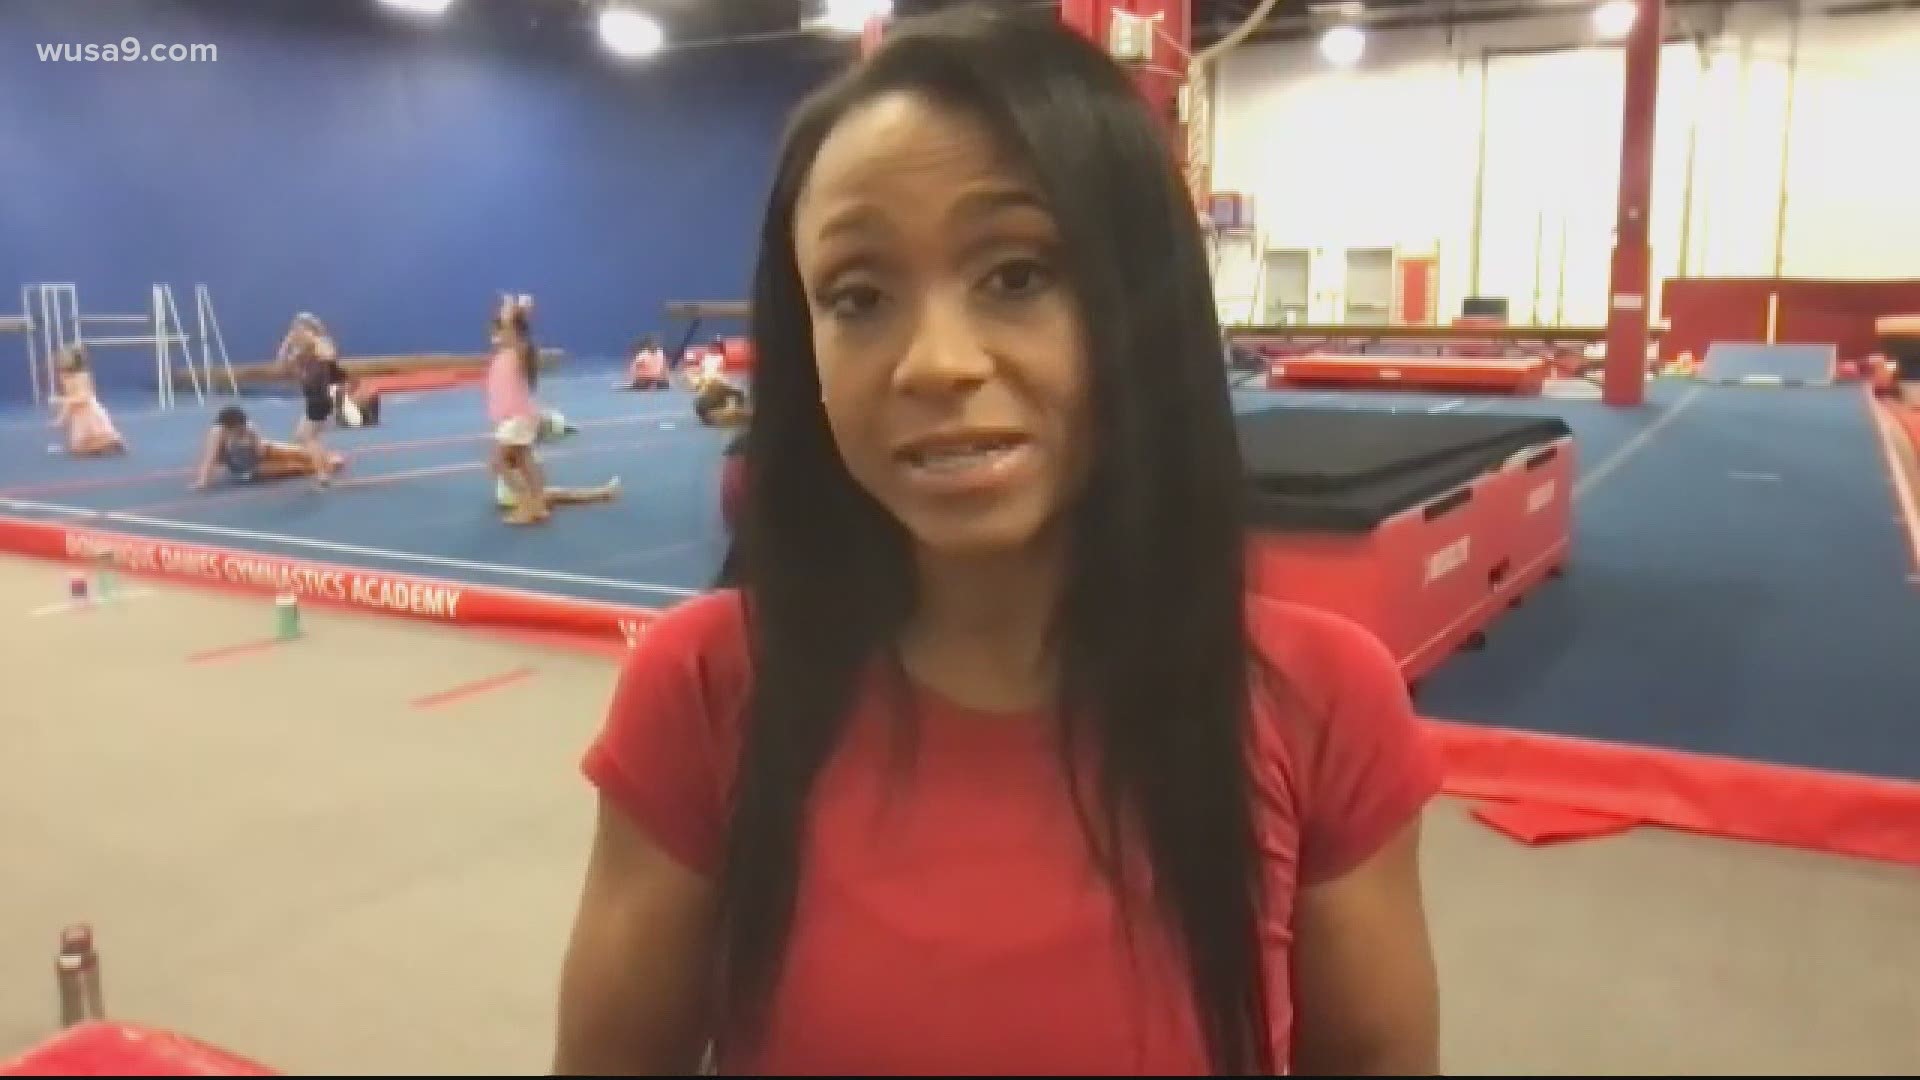 Dominique Dawes explains the circumstances surrounding Simone Biles' decision to pull out of the Olympic gymnastic finals and what the athlete's future may be.